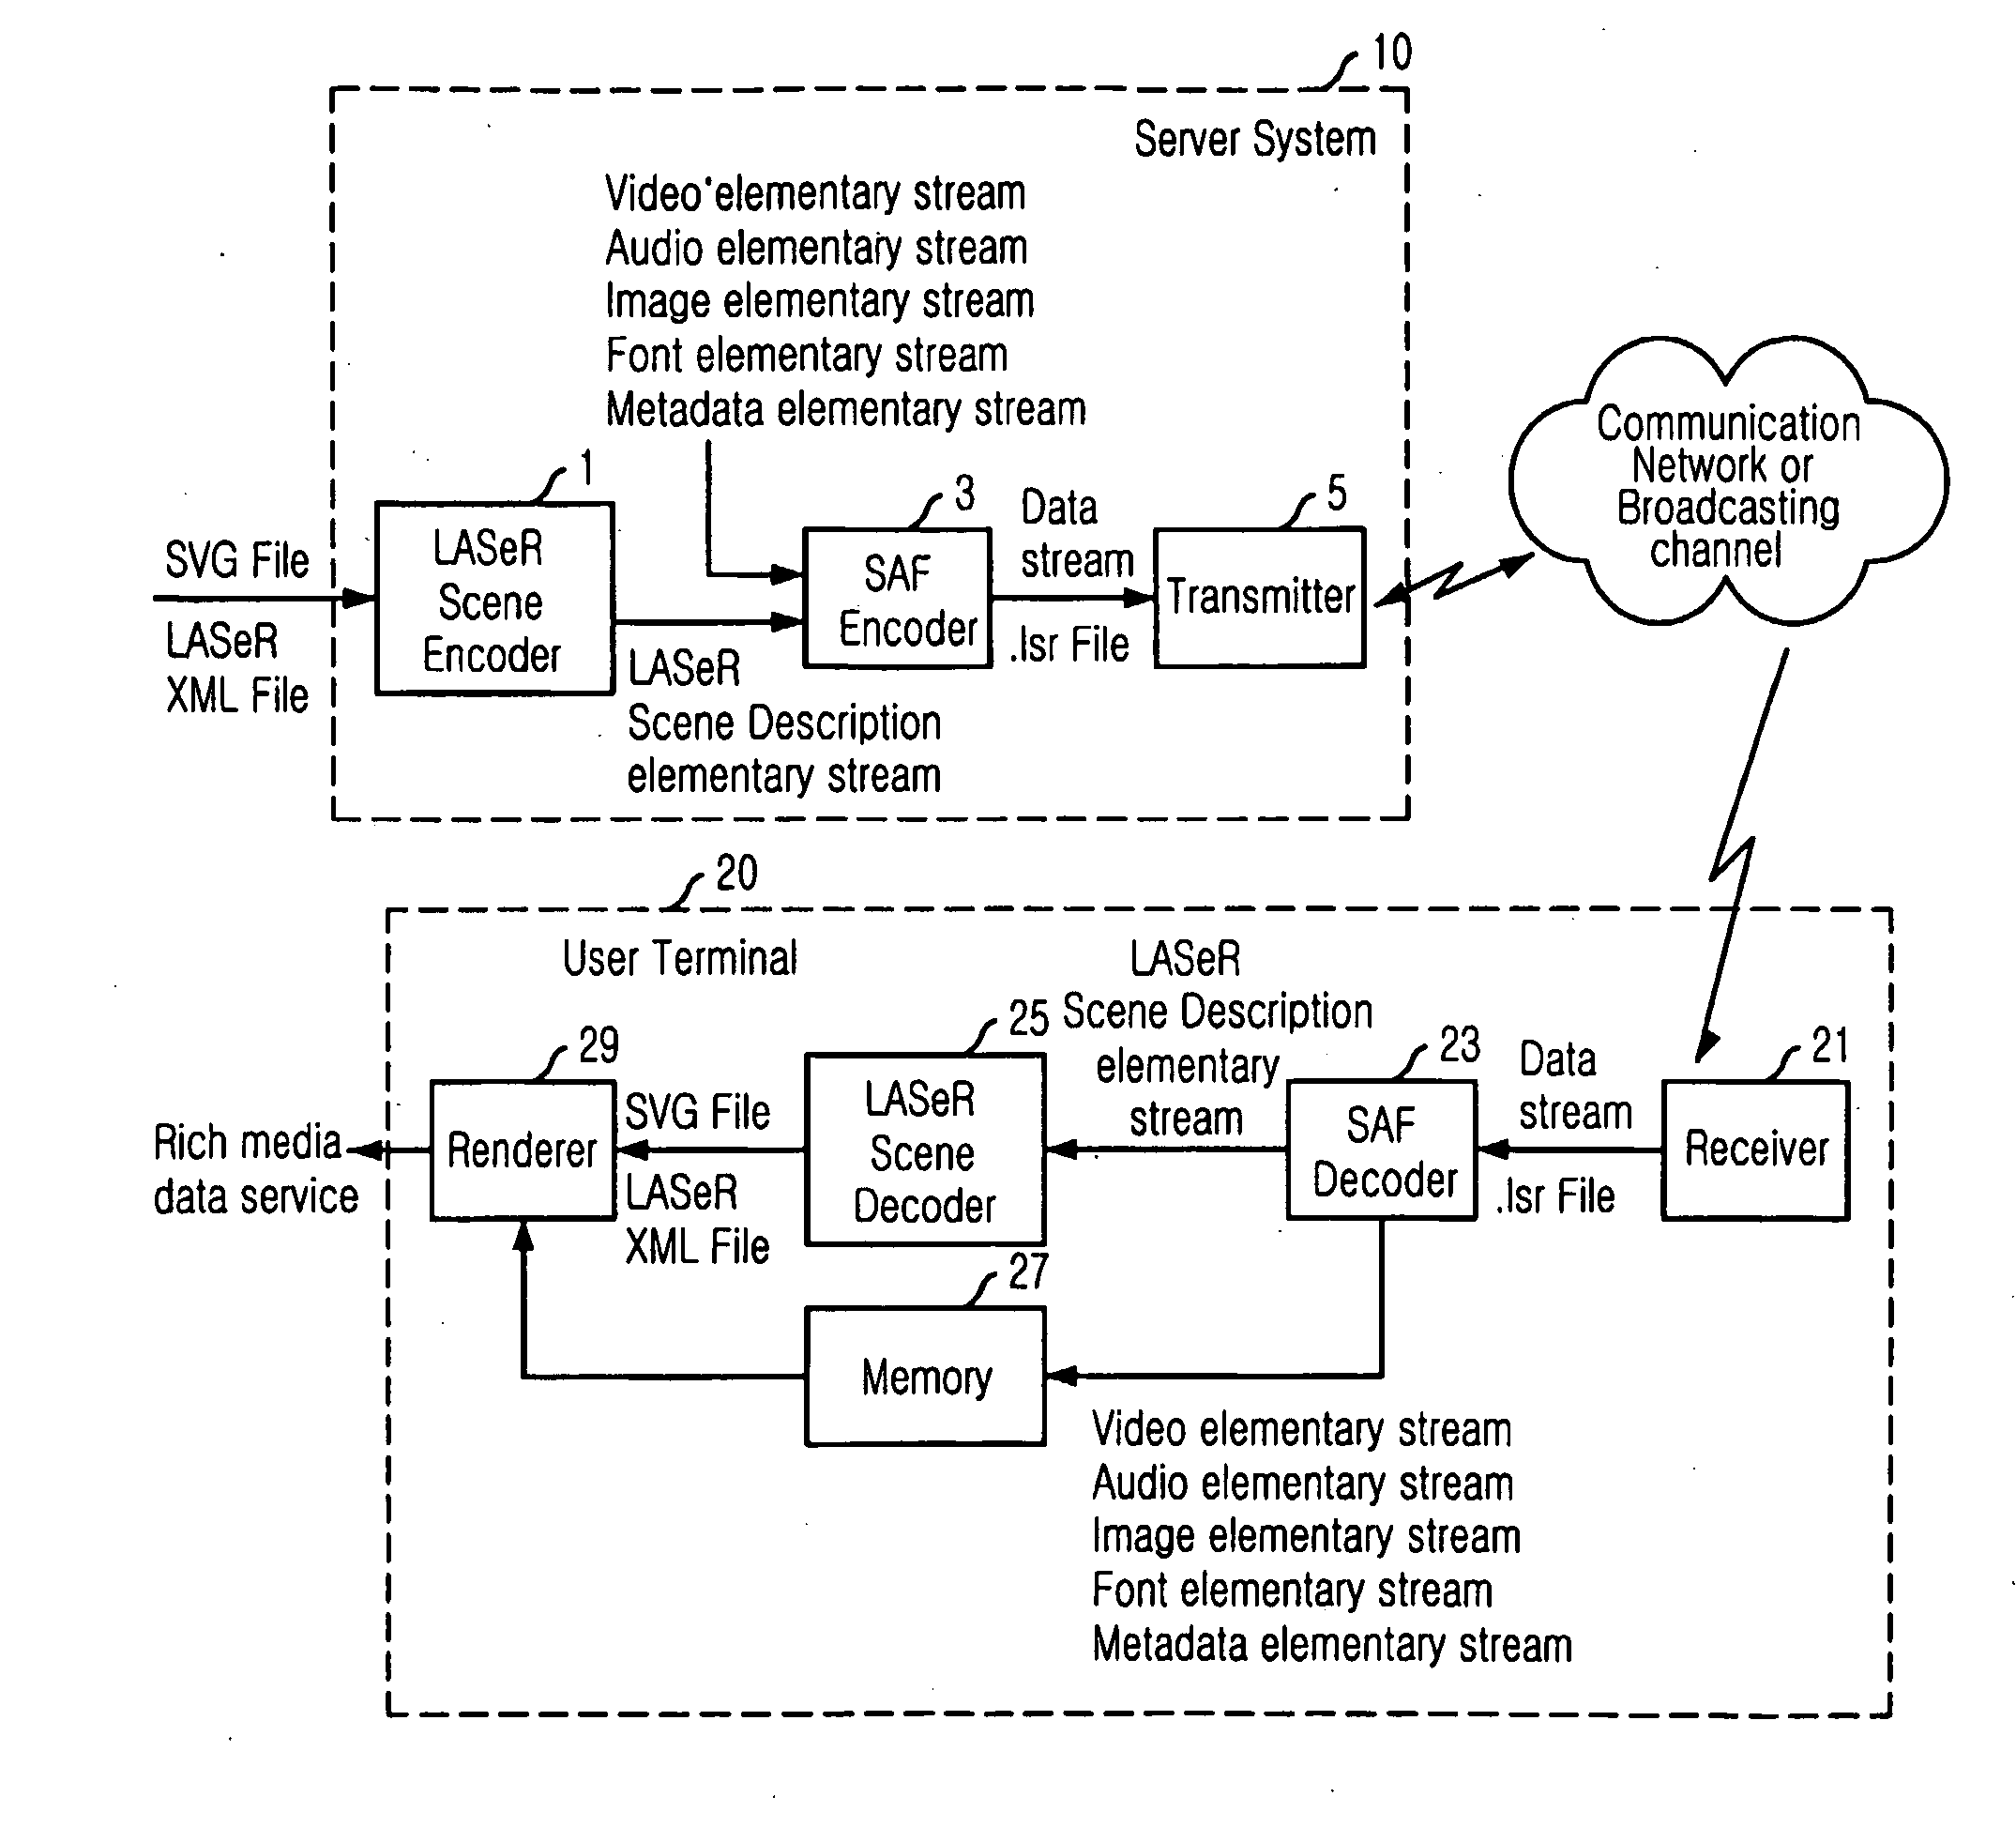 Saf Synchronization Layer Packet Structure and Server System Therefor